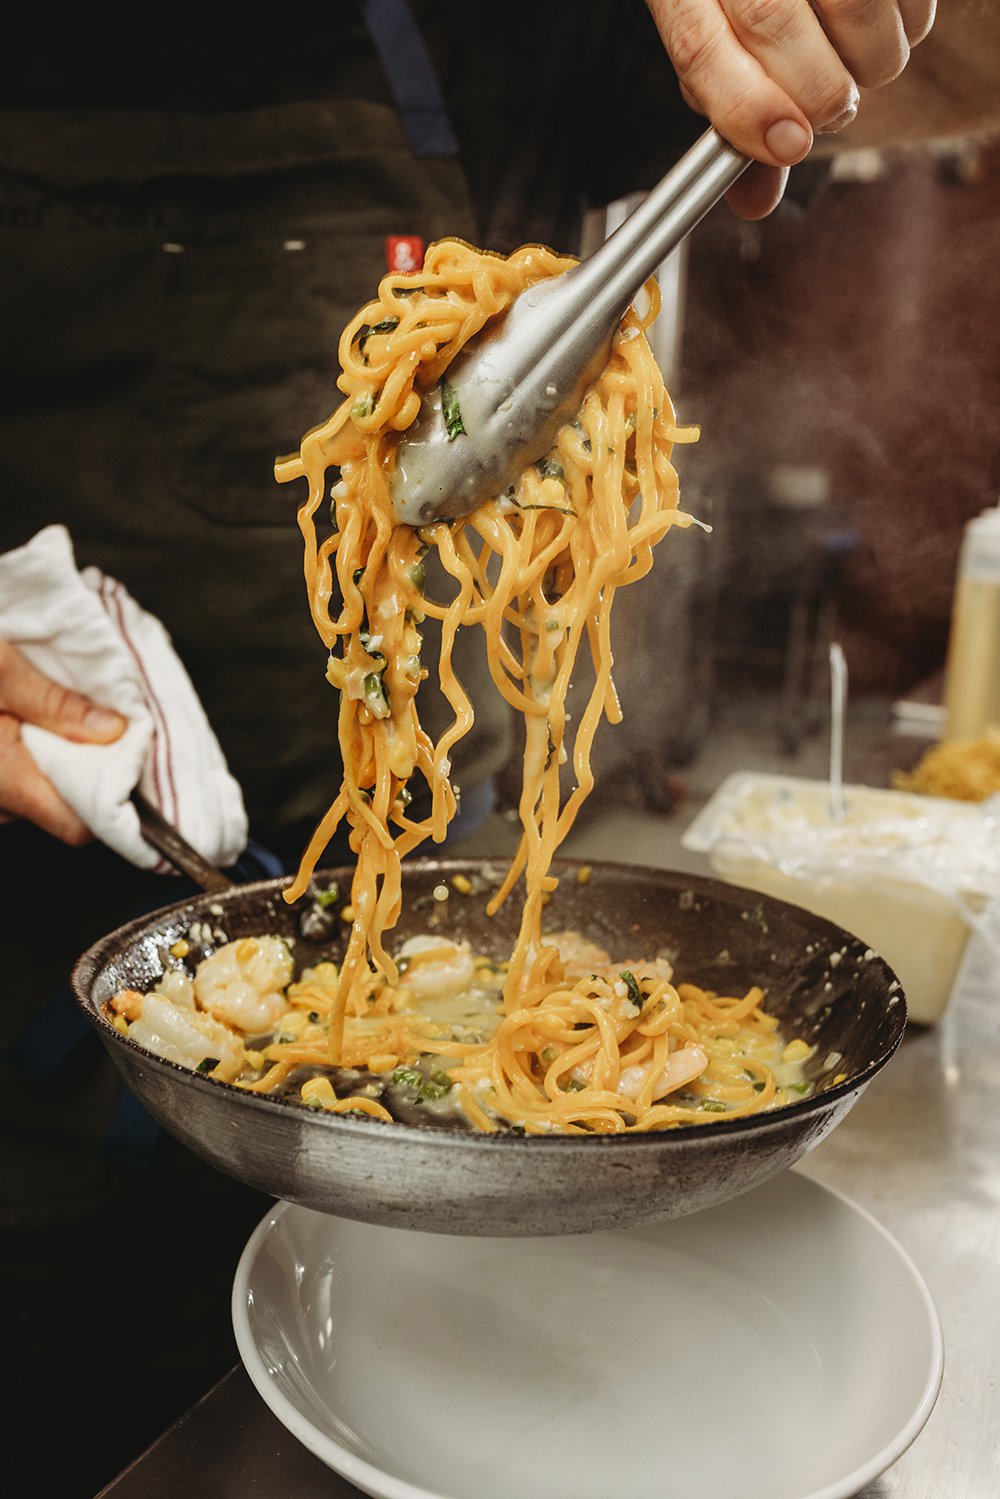 Is Making Your Own Pasta Worth the Effort? - Mondomulia